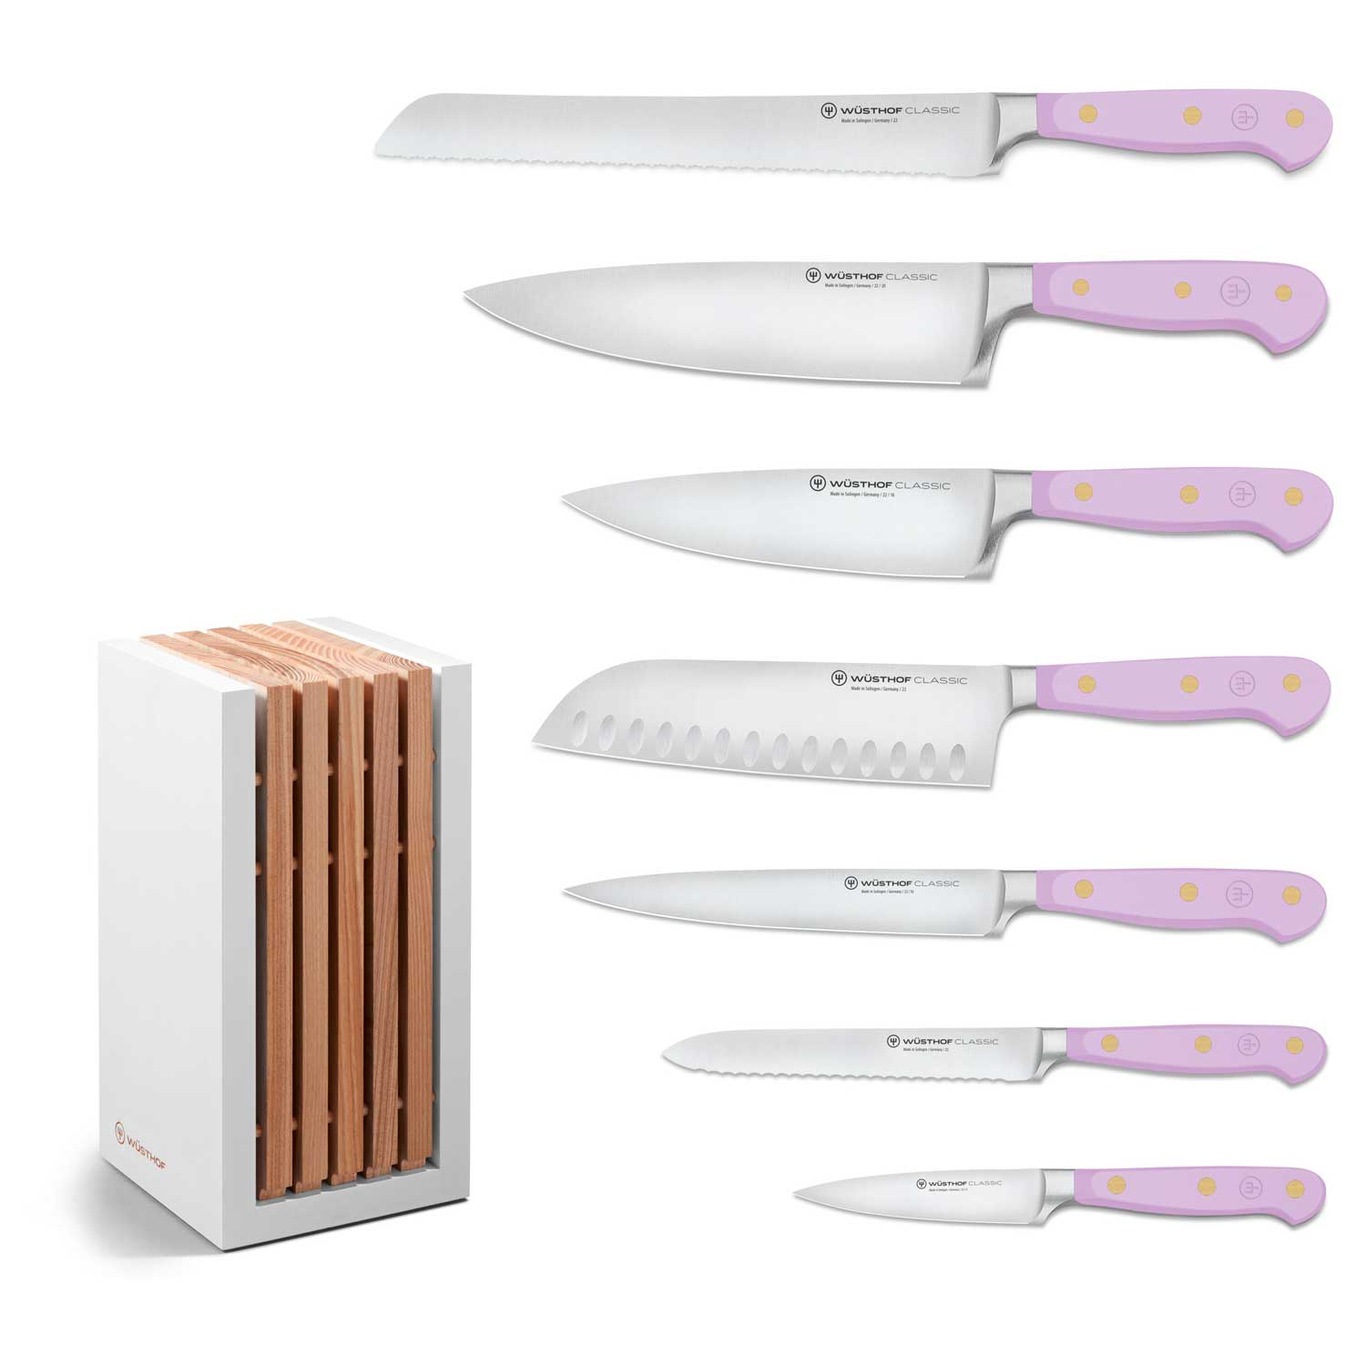 Classic Colour Knife Set With Knife Block 8 Pieces, Purple Yam